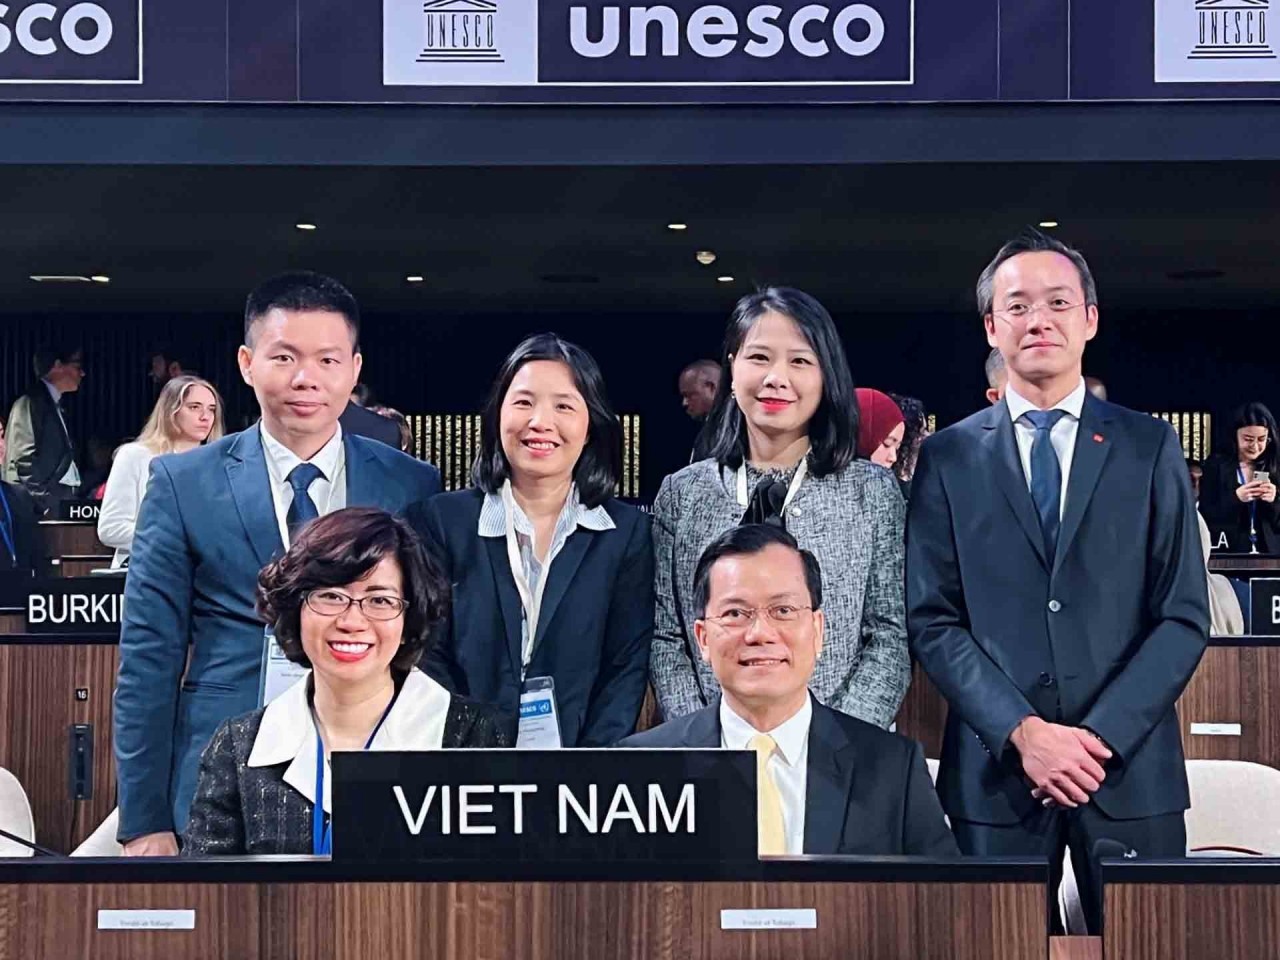 Vietnam  solutions to Asia-Pacific, UNESCO issues: Deputy Minister